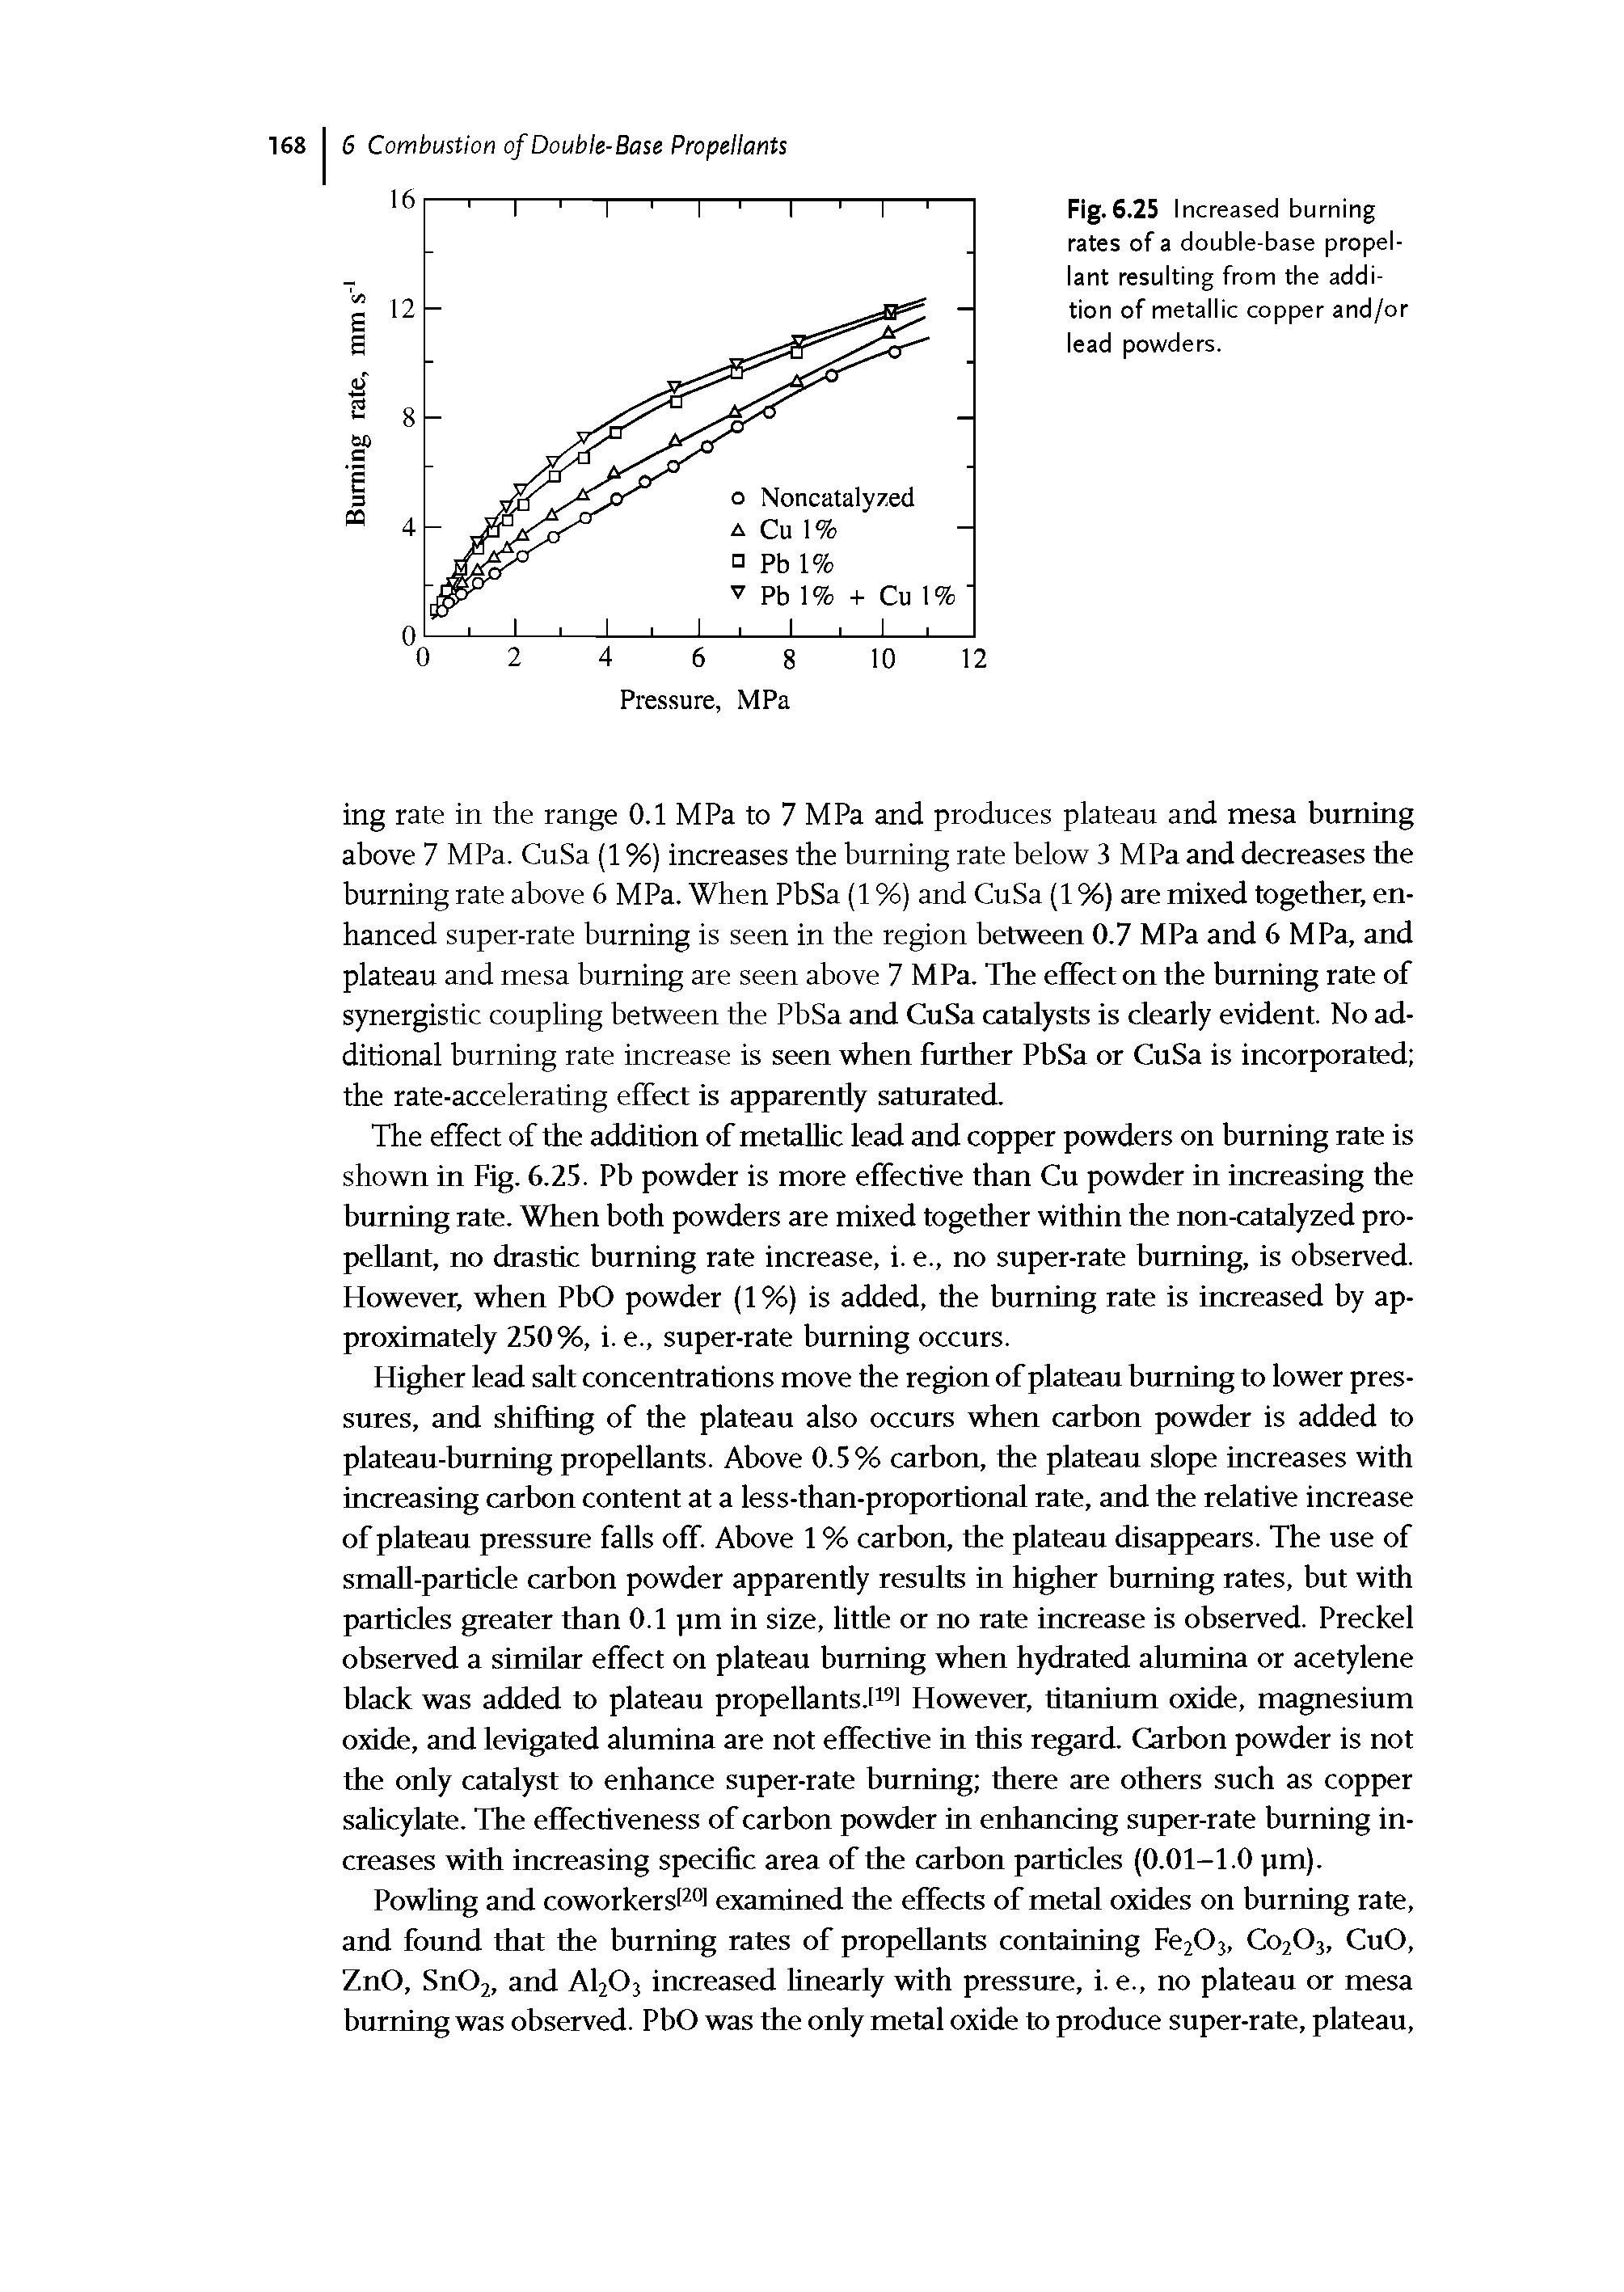 Fig. 6.25 Increased burning rates of a double-base propellant resulting from the addition of metallic copper and/or lead powders.